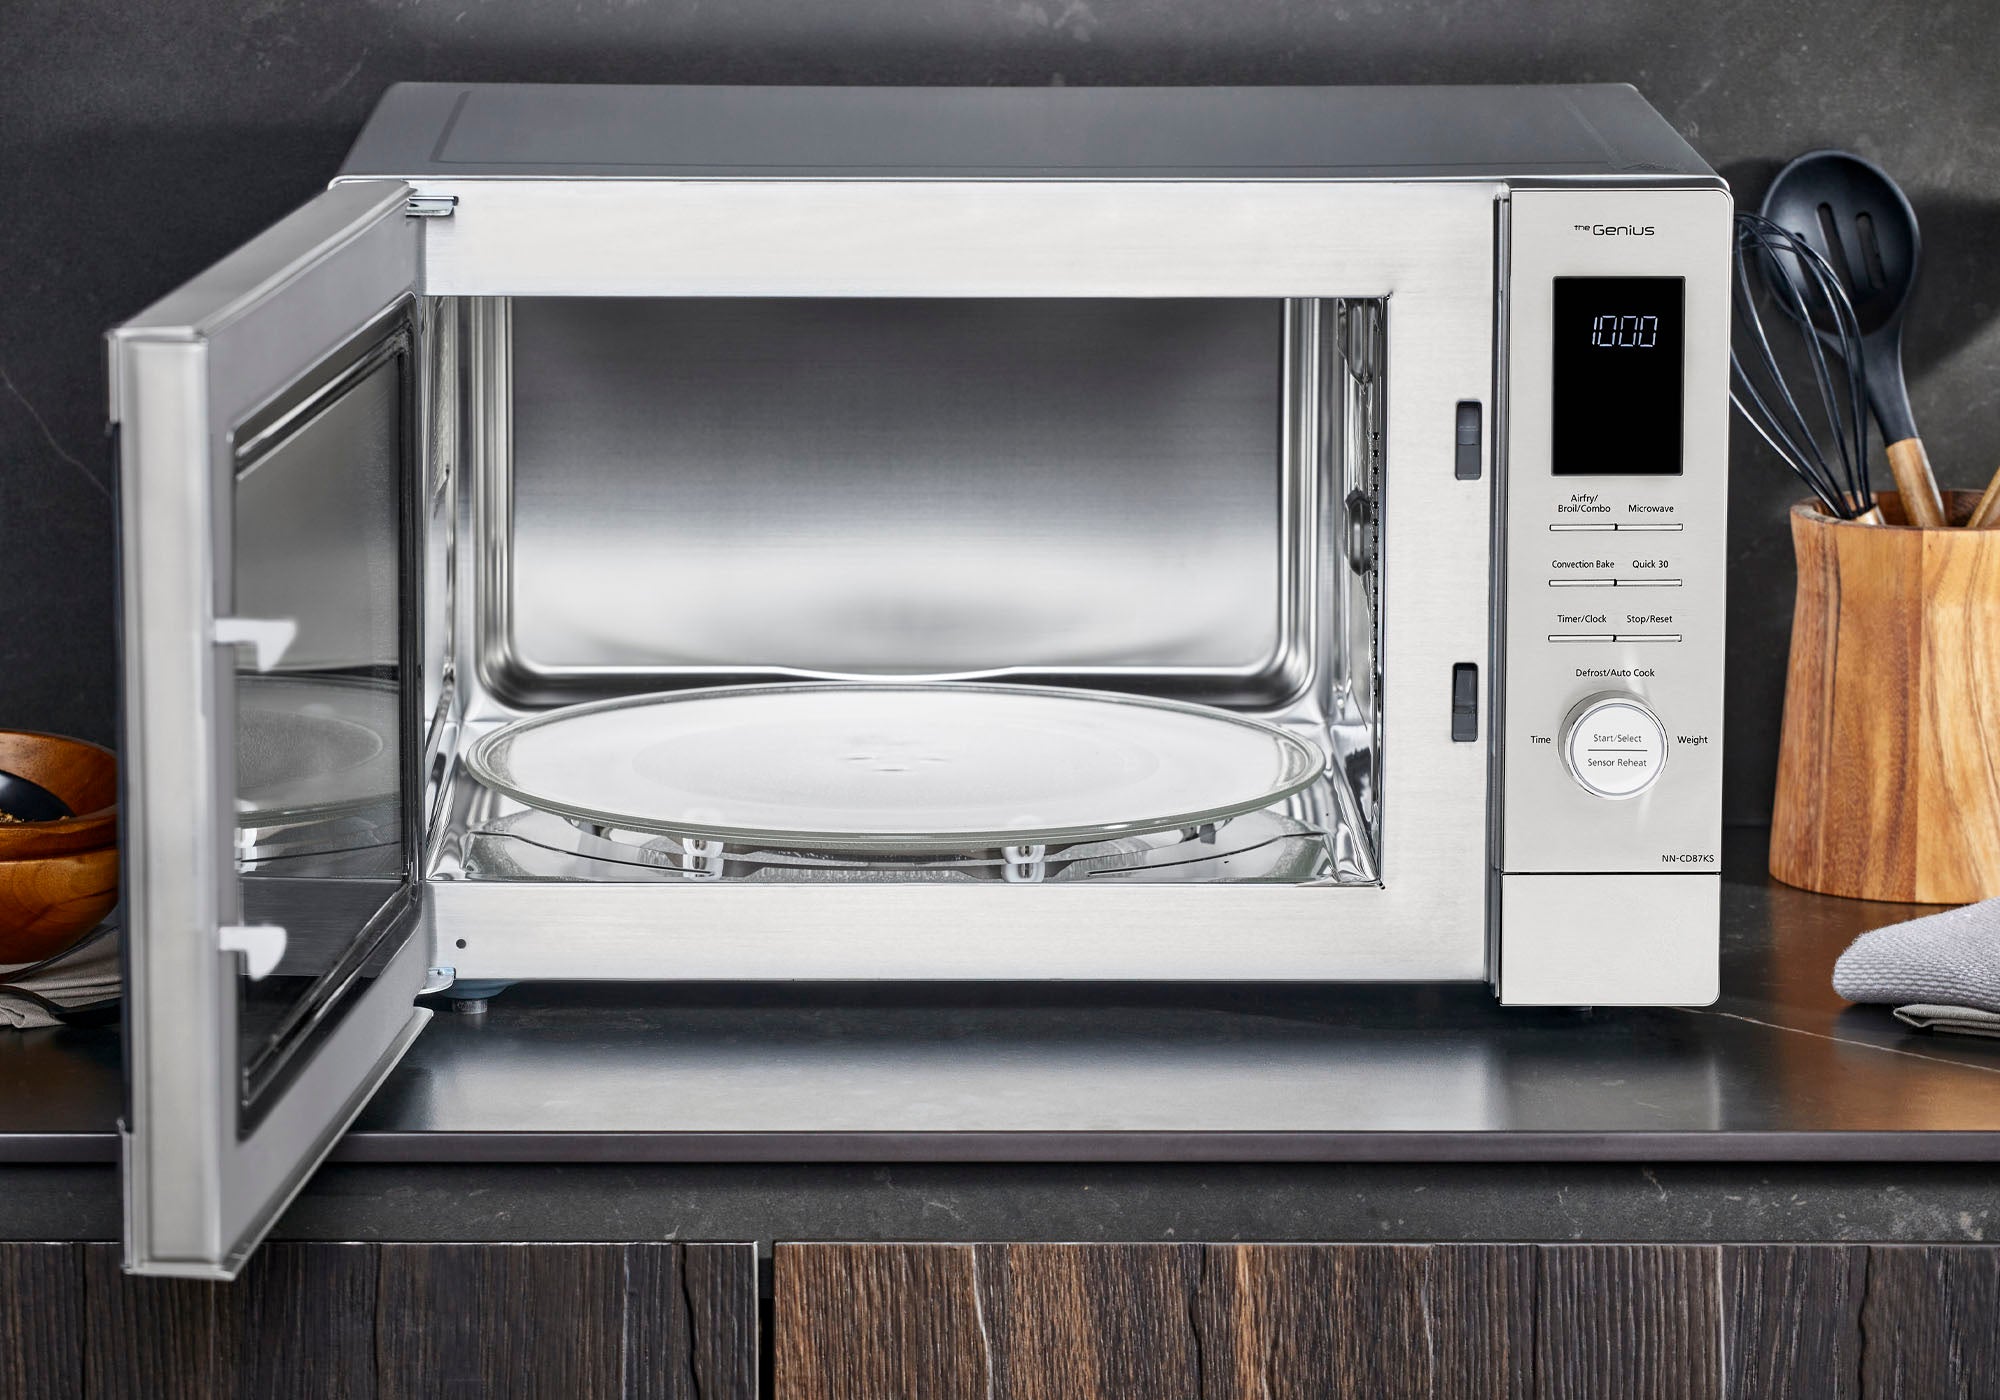 How to Clean Your Microwave Oven—2 Foolproof Methods, No Harsh Chemicals Required